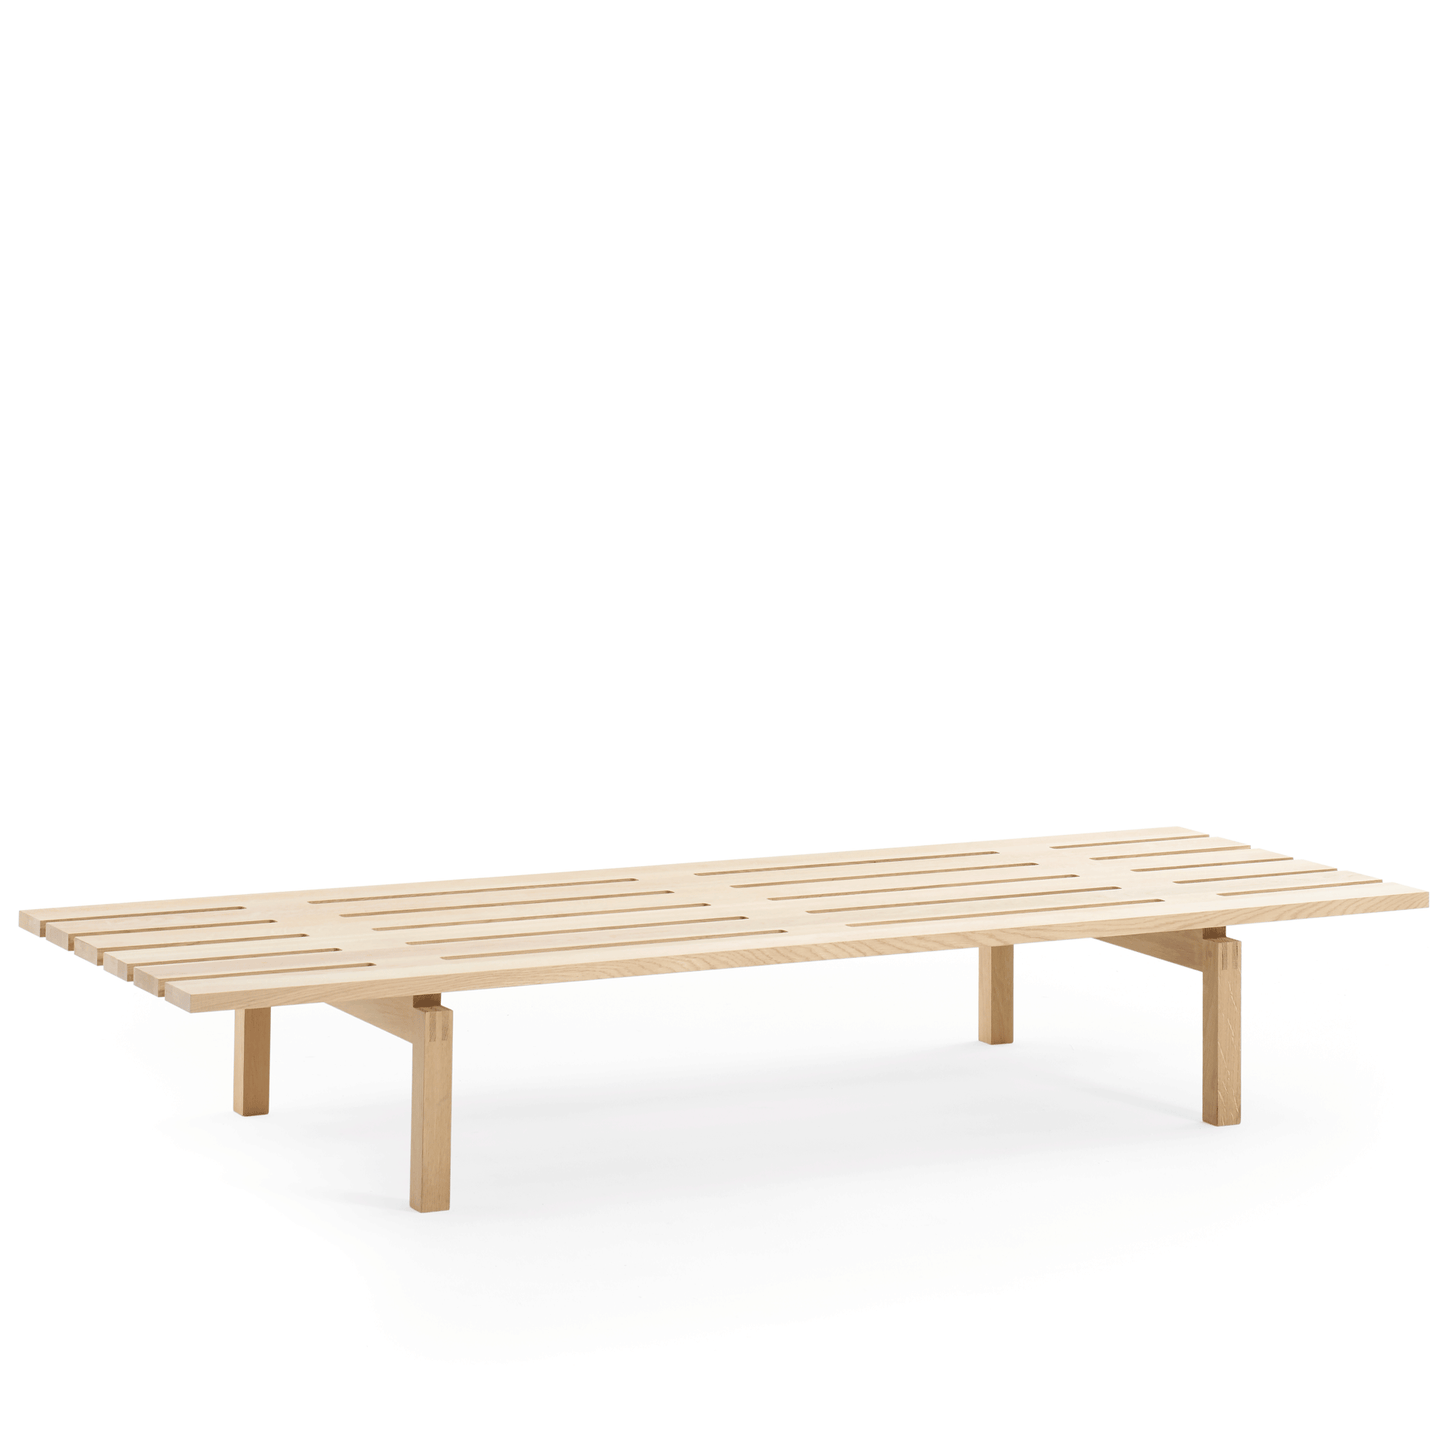 DAYBED NO. 115